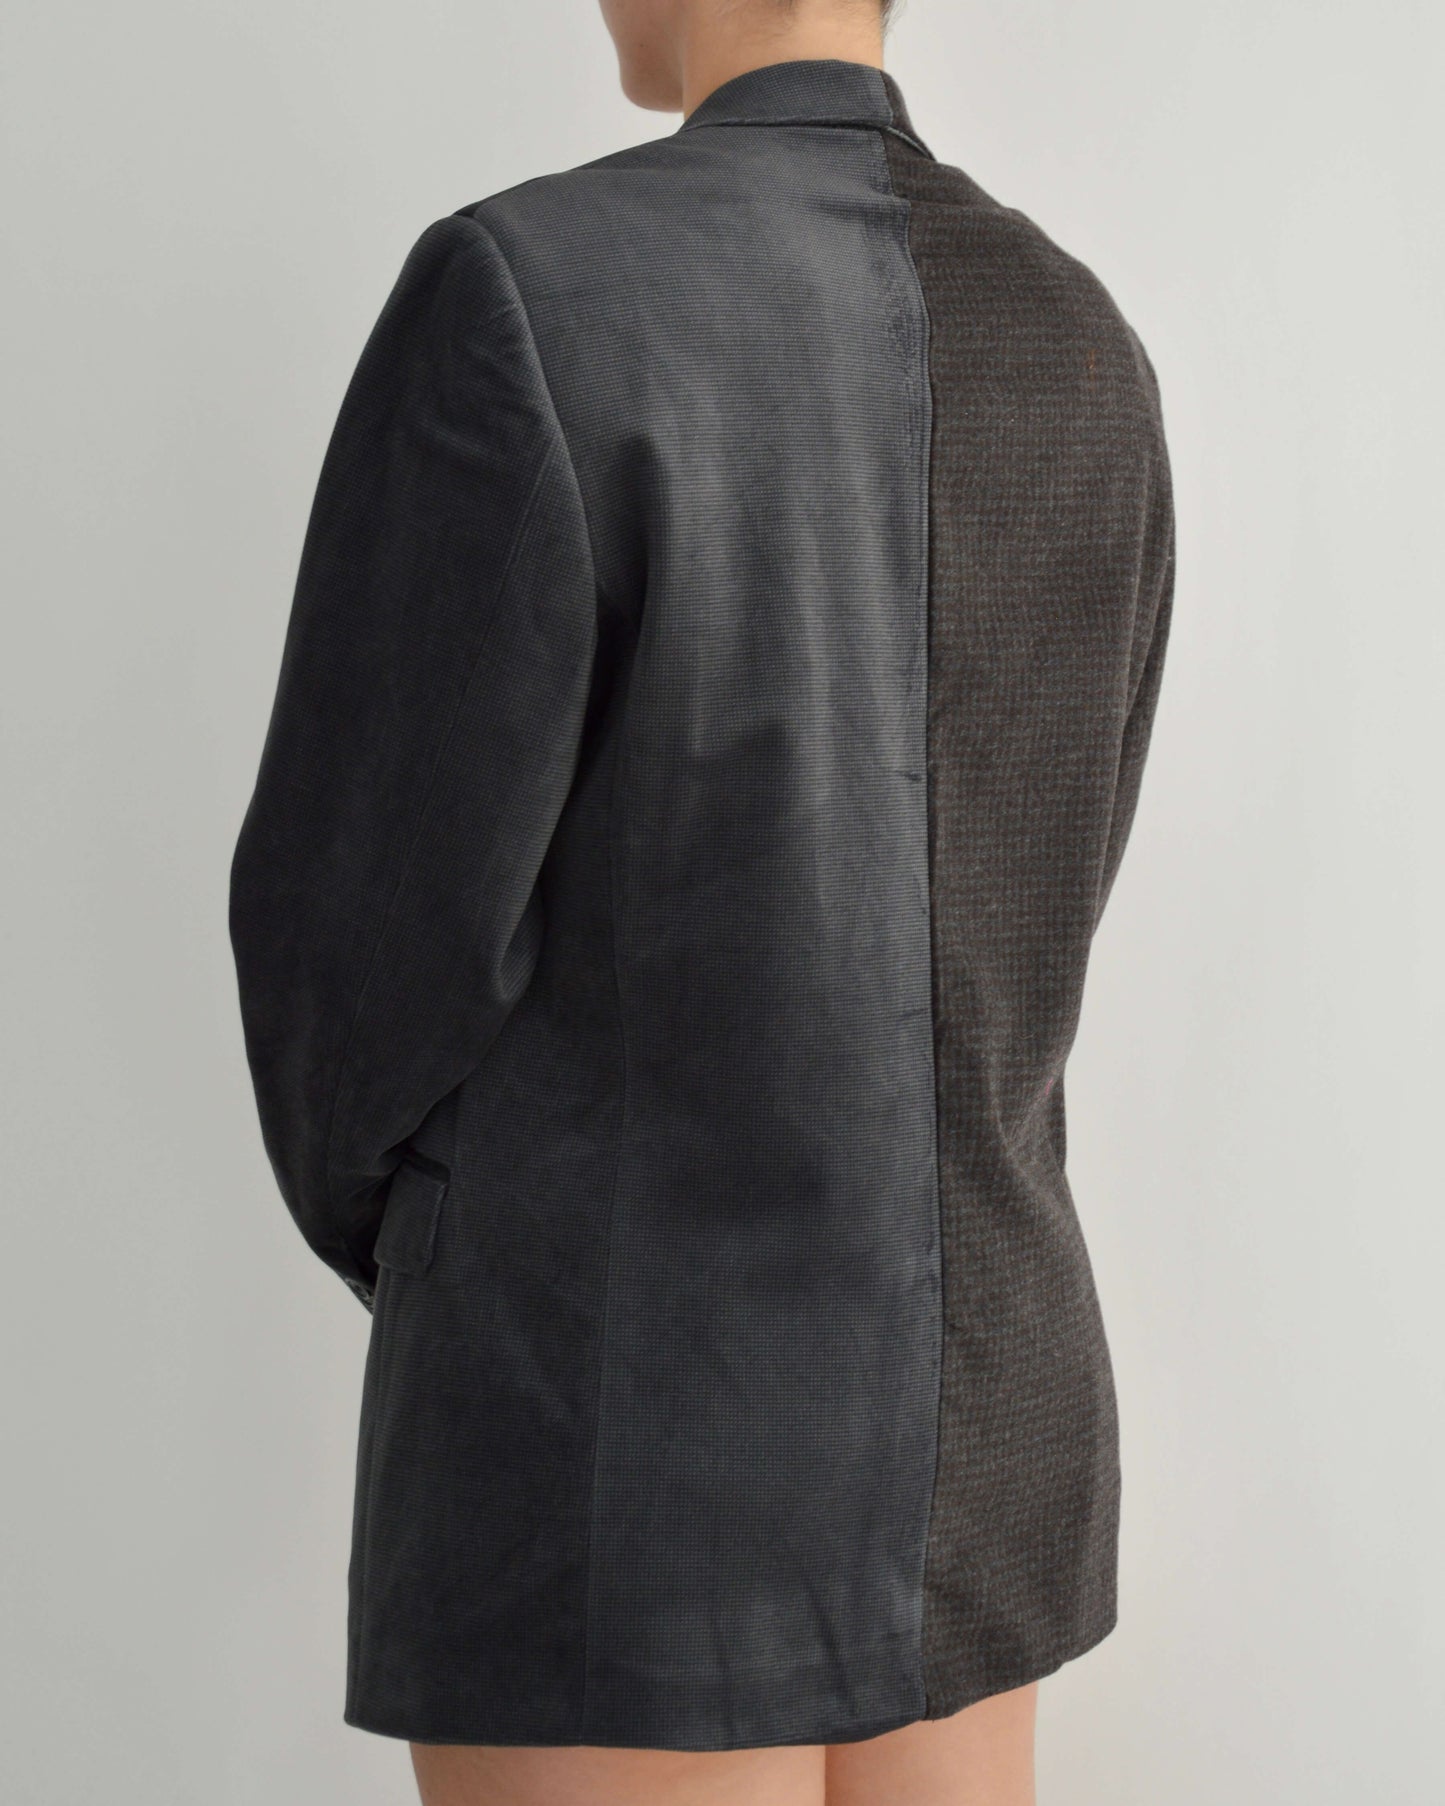 DUO Blazer - Soft and Textured (S/L)